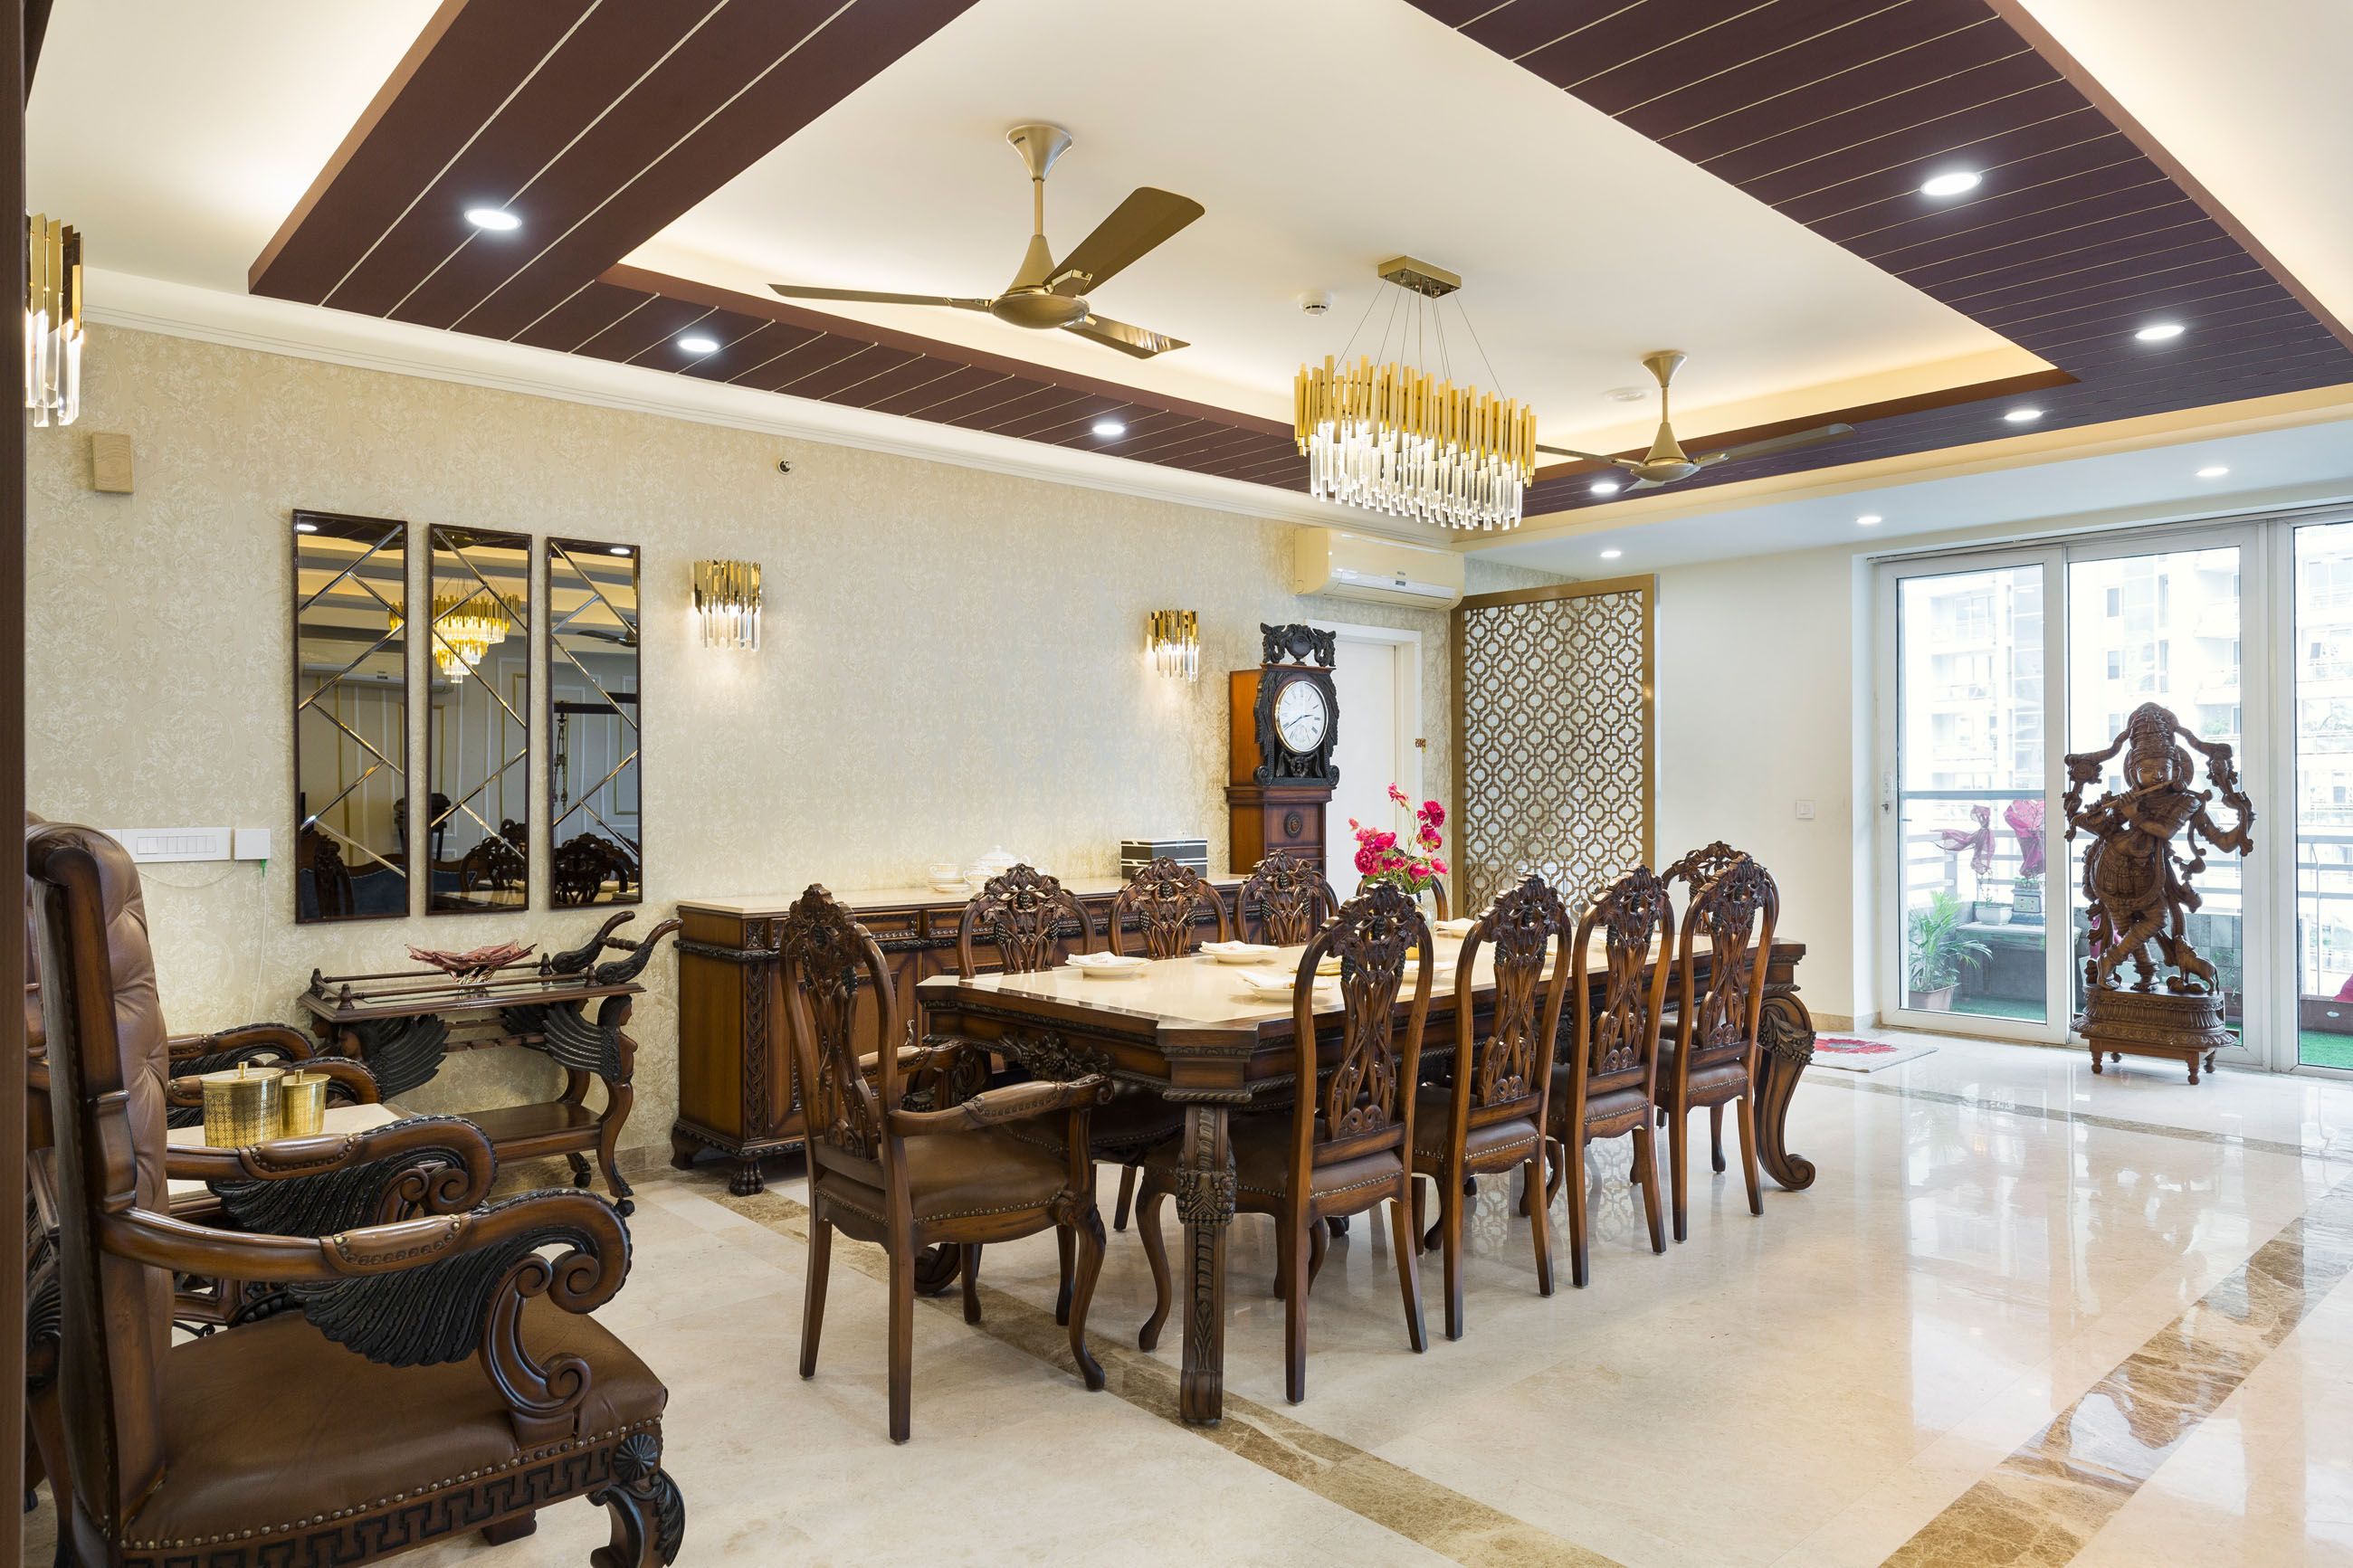 Wooden Transitional Peripheral False Ceiling Design With Chandelier